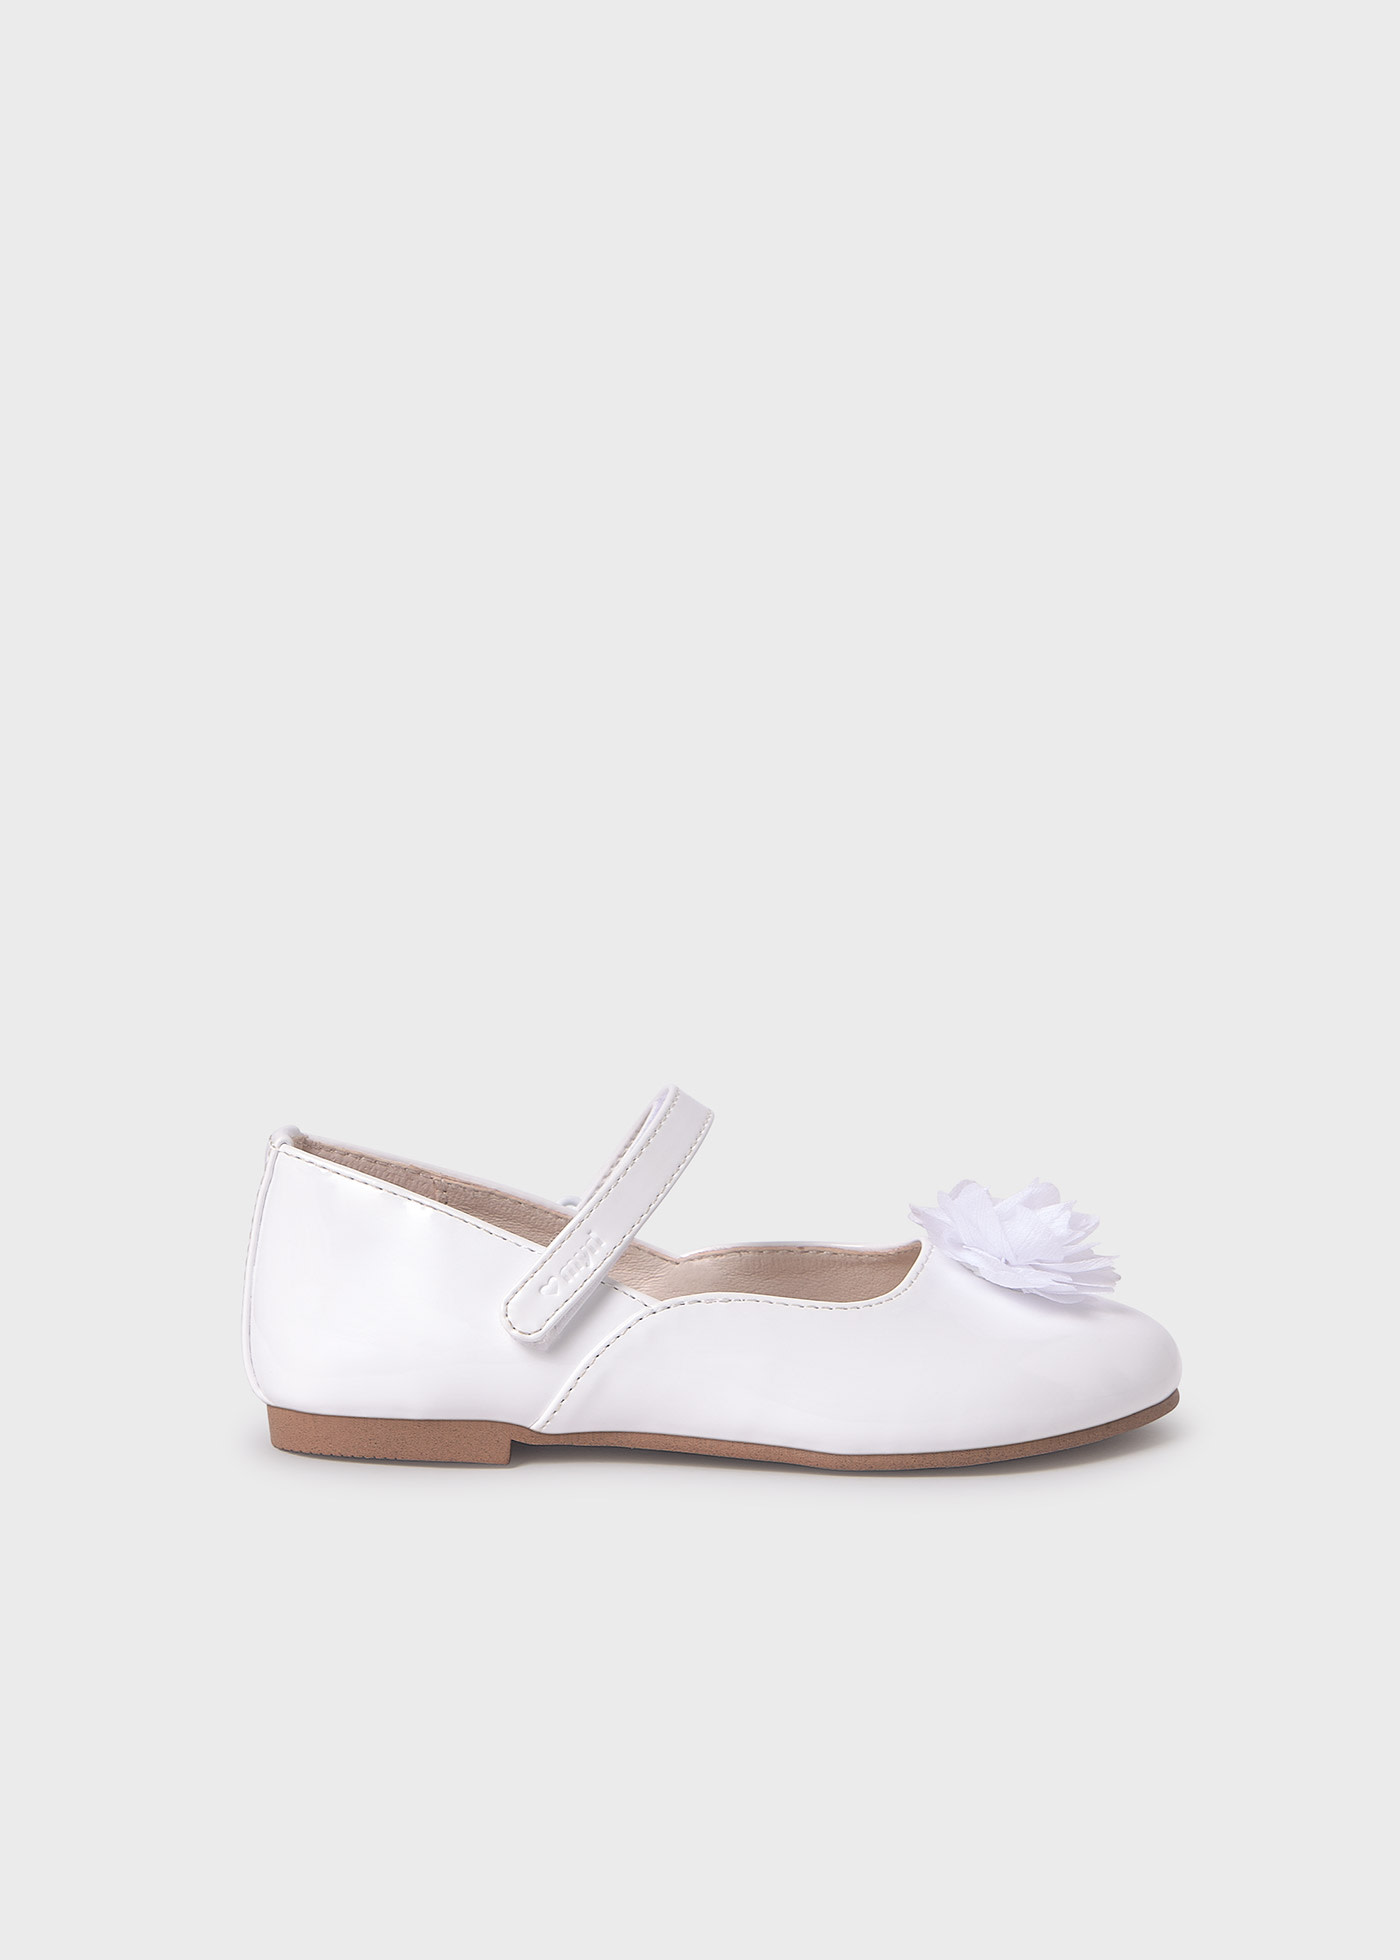 Girls mary jane sustainable patent leather